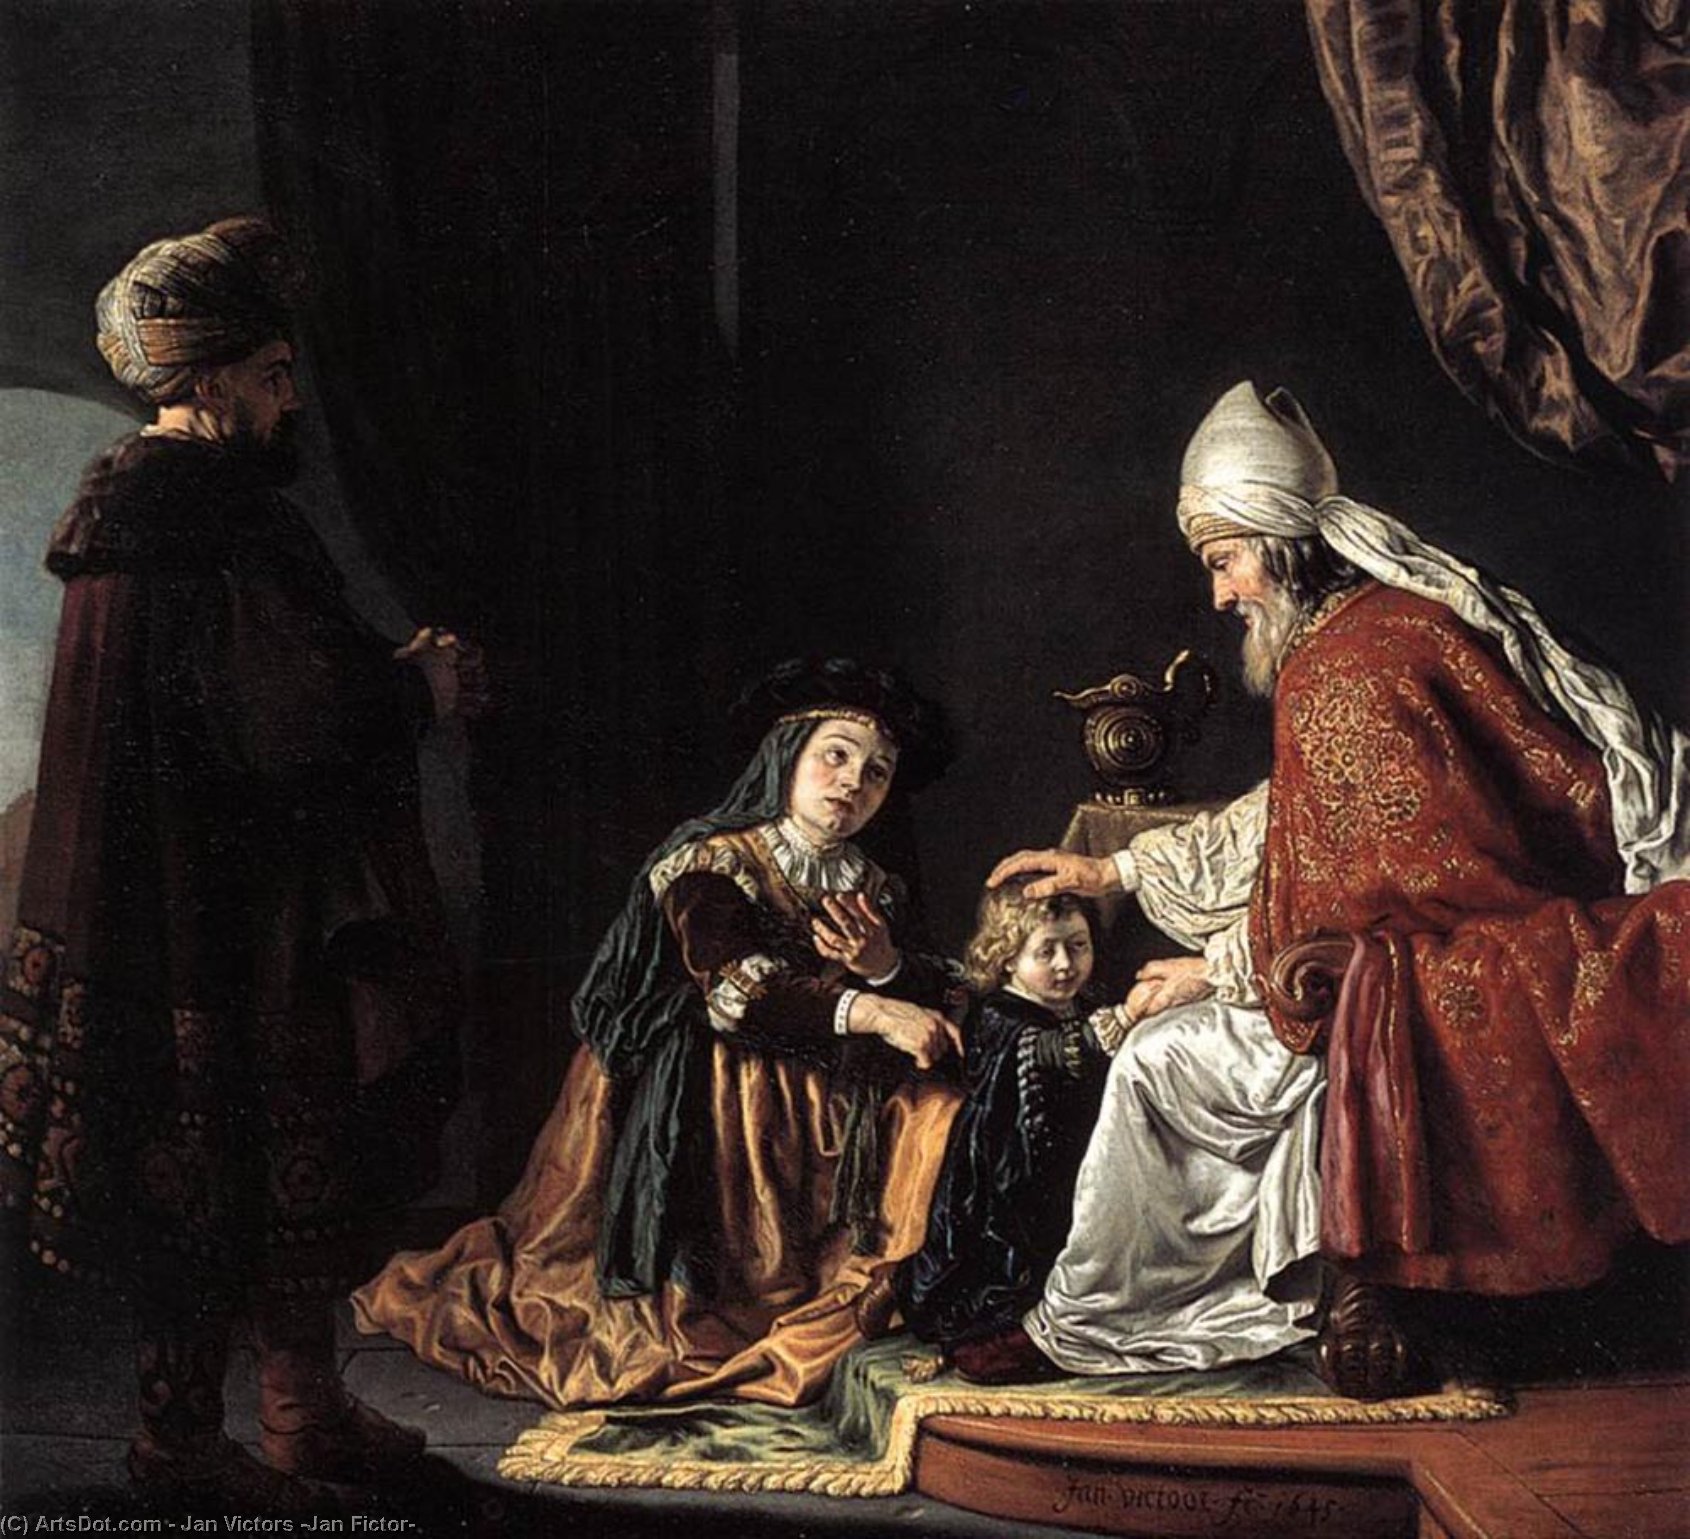 Order Paintings Reproductions Hannah Giving Her Son Samuel to the Priest, 1645 by Jan Victors (Jan Fictor) (1619-1679, Netherlands) | ArtsDot.com